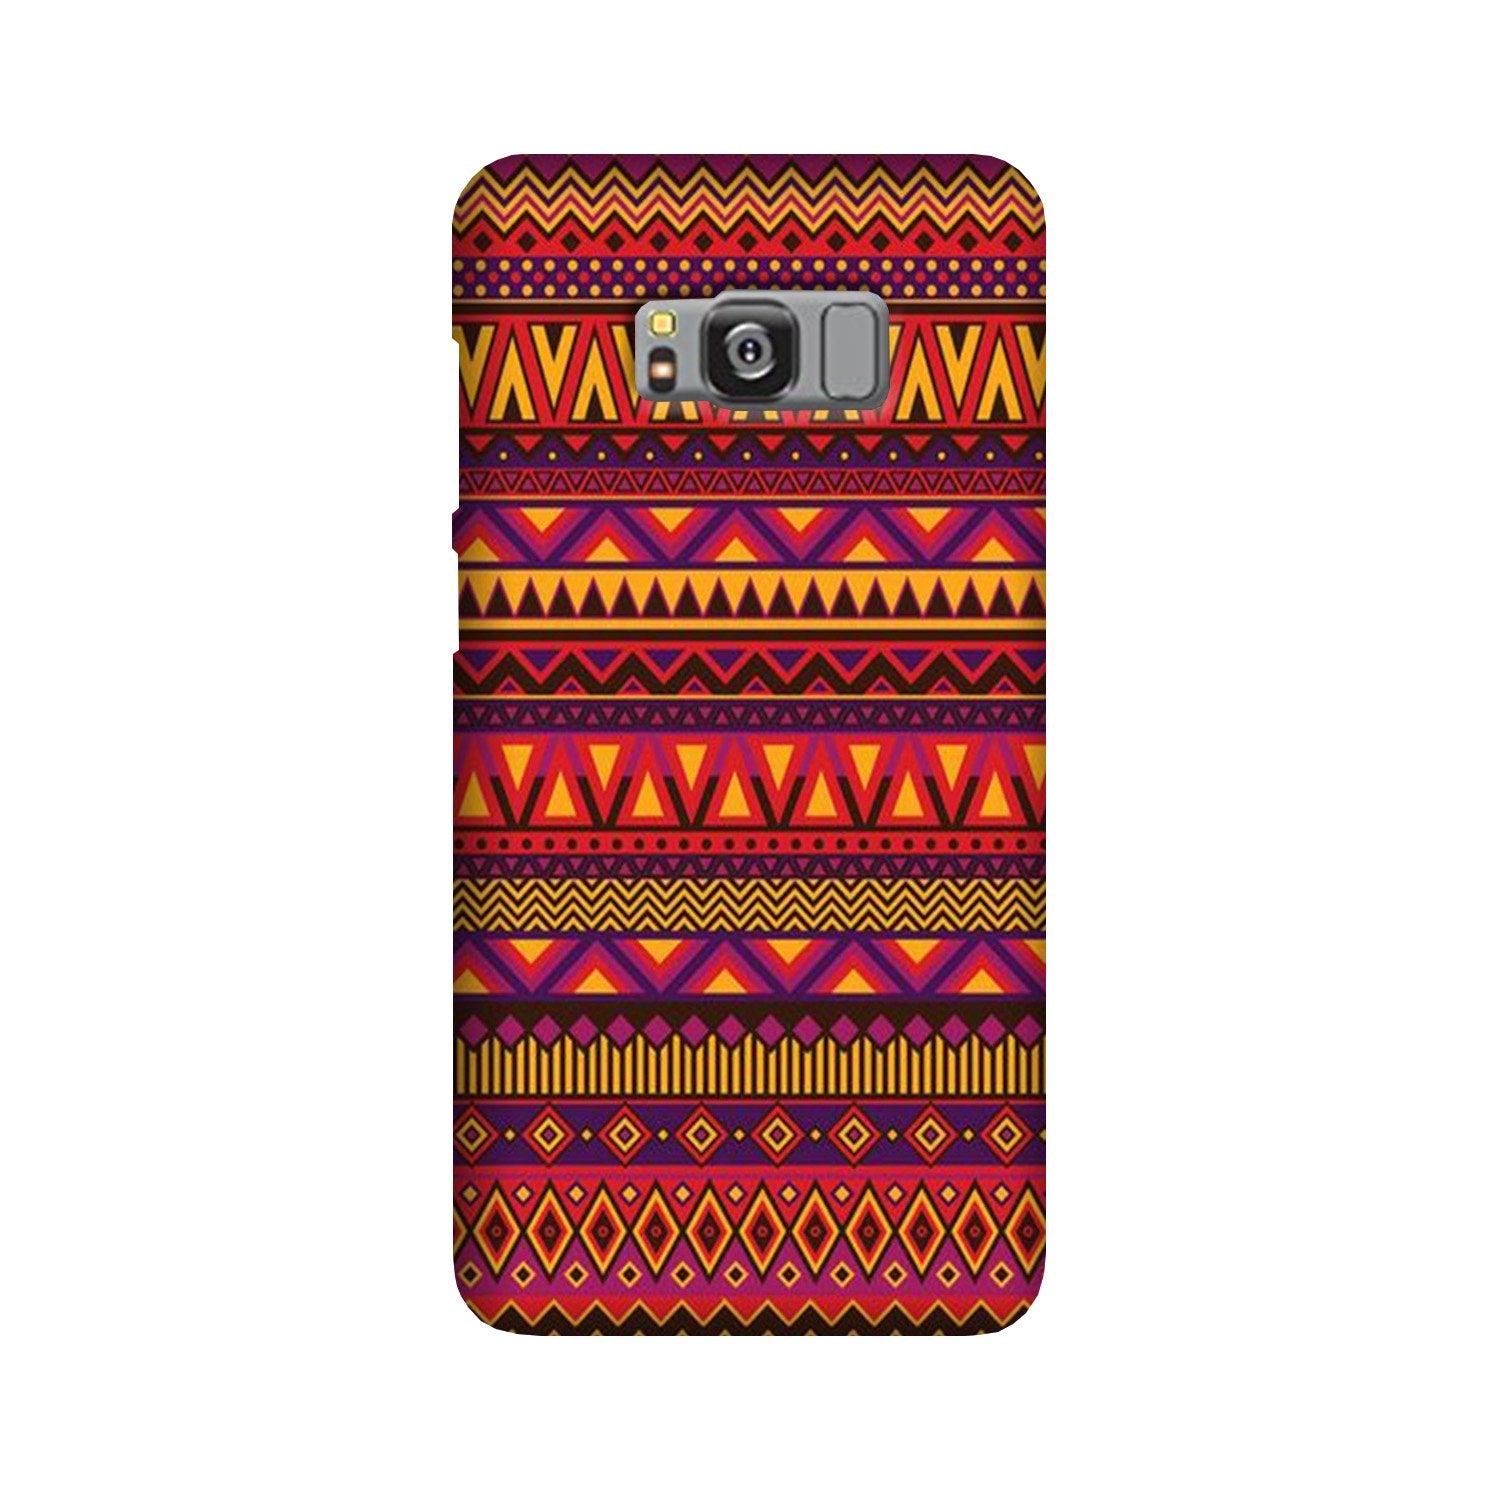 Zigzag line pattern2 Case for Galaxy S8